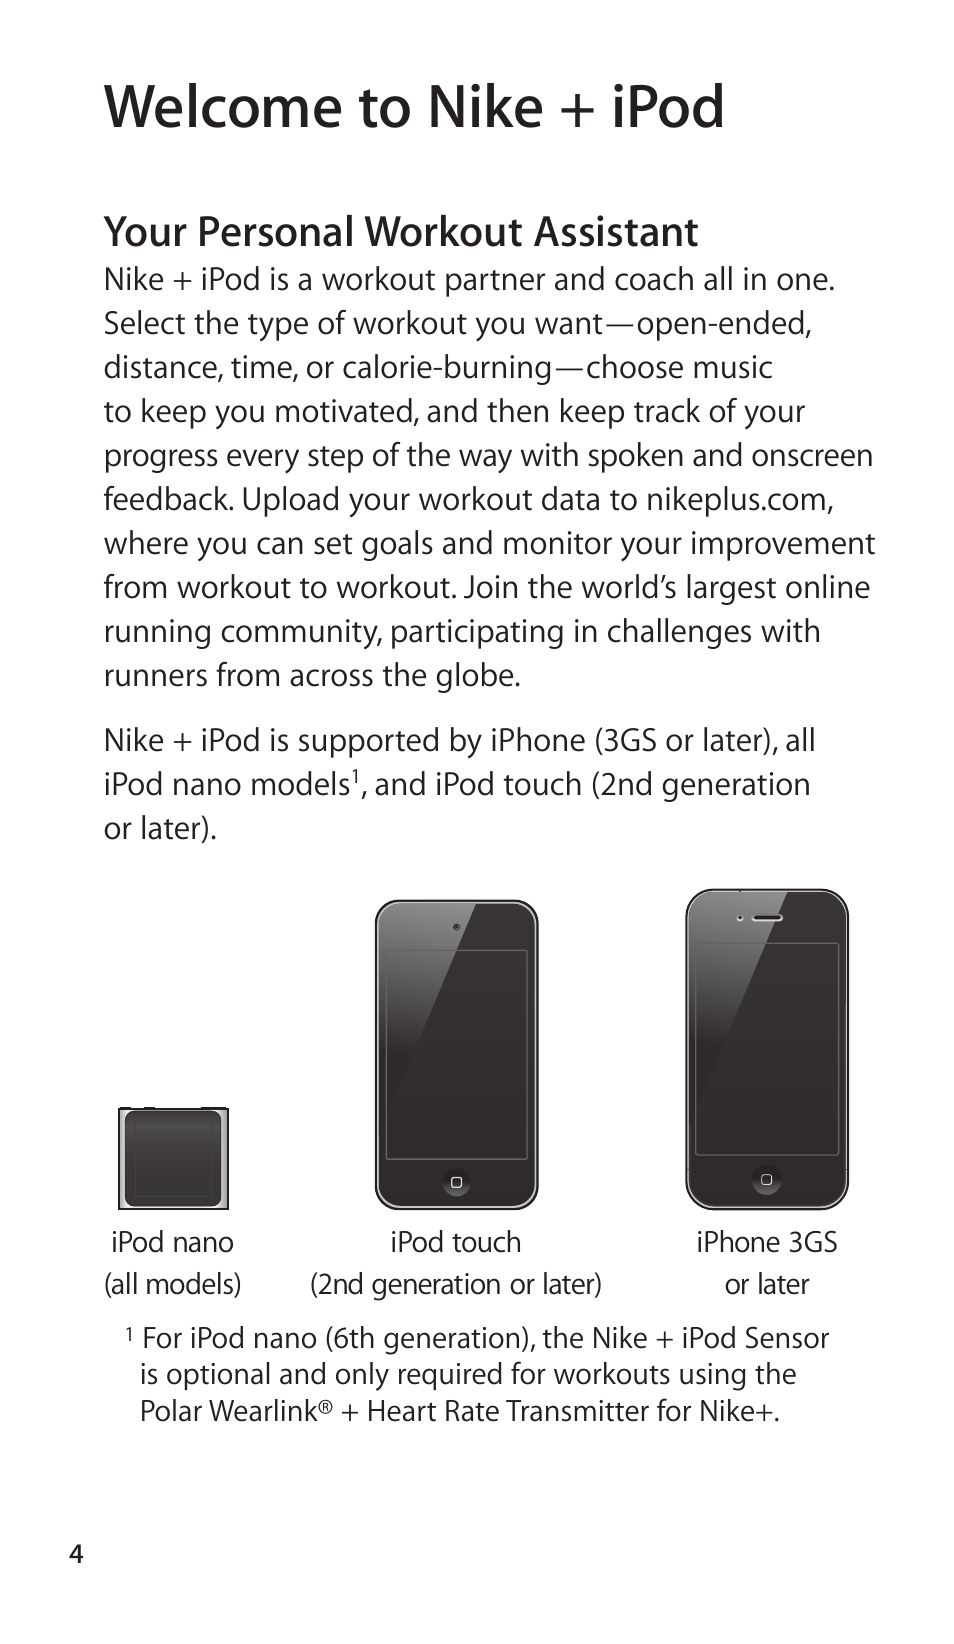 Welcome to nike + ipod, Your personal workout assistant | Apple Nike + iPod  Sensor User Manual | Page 4 / 144